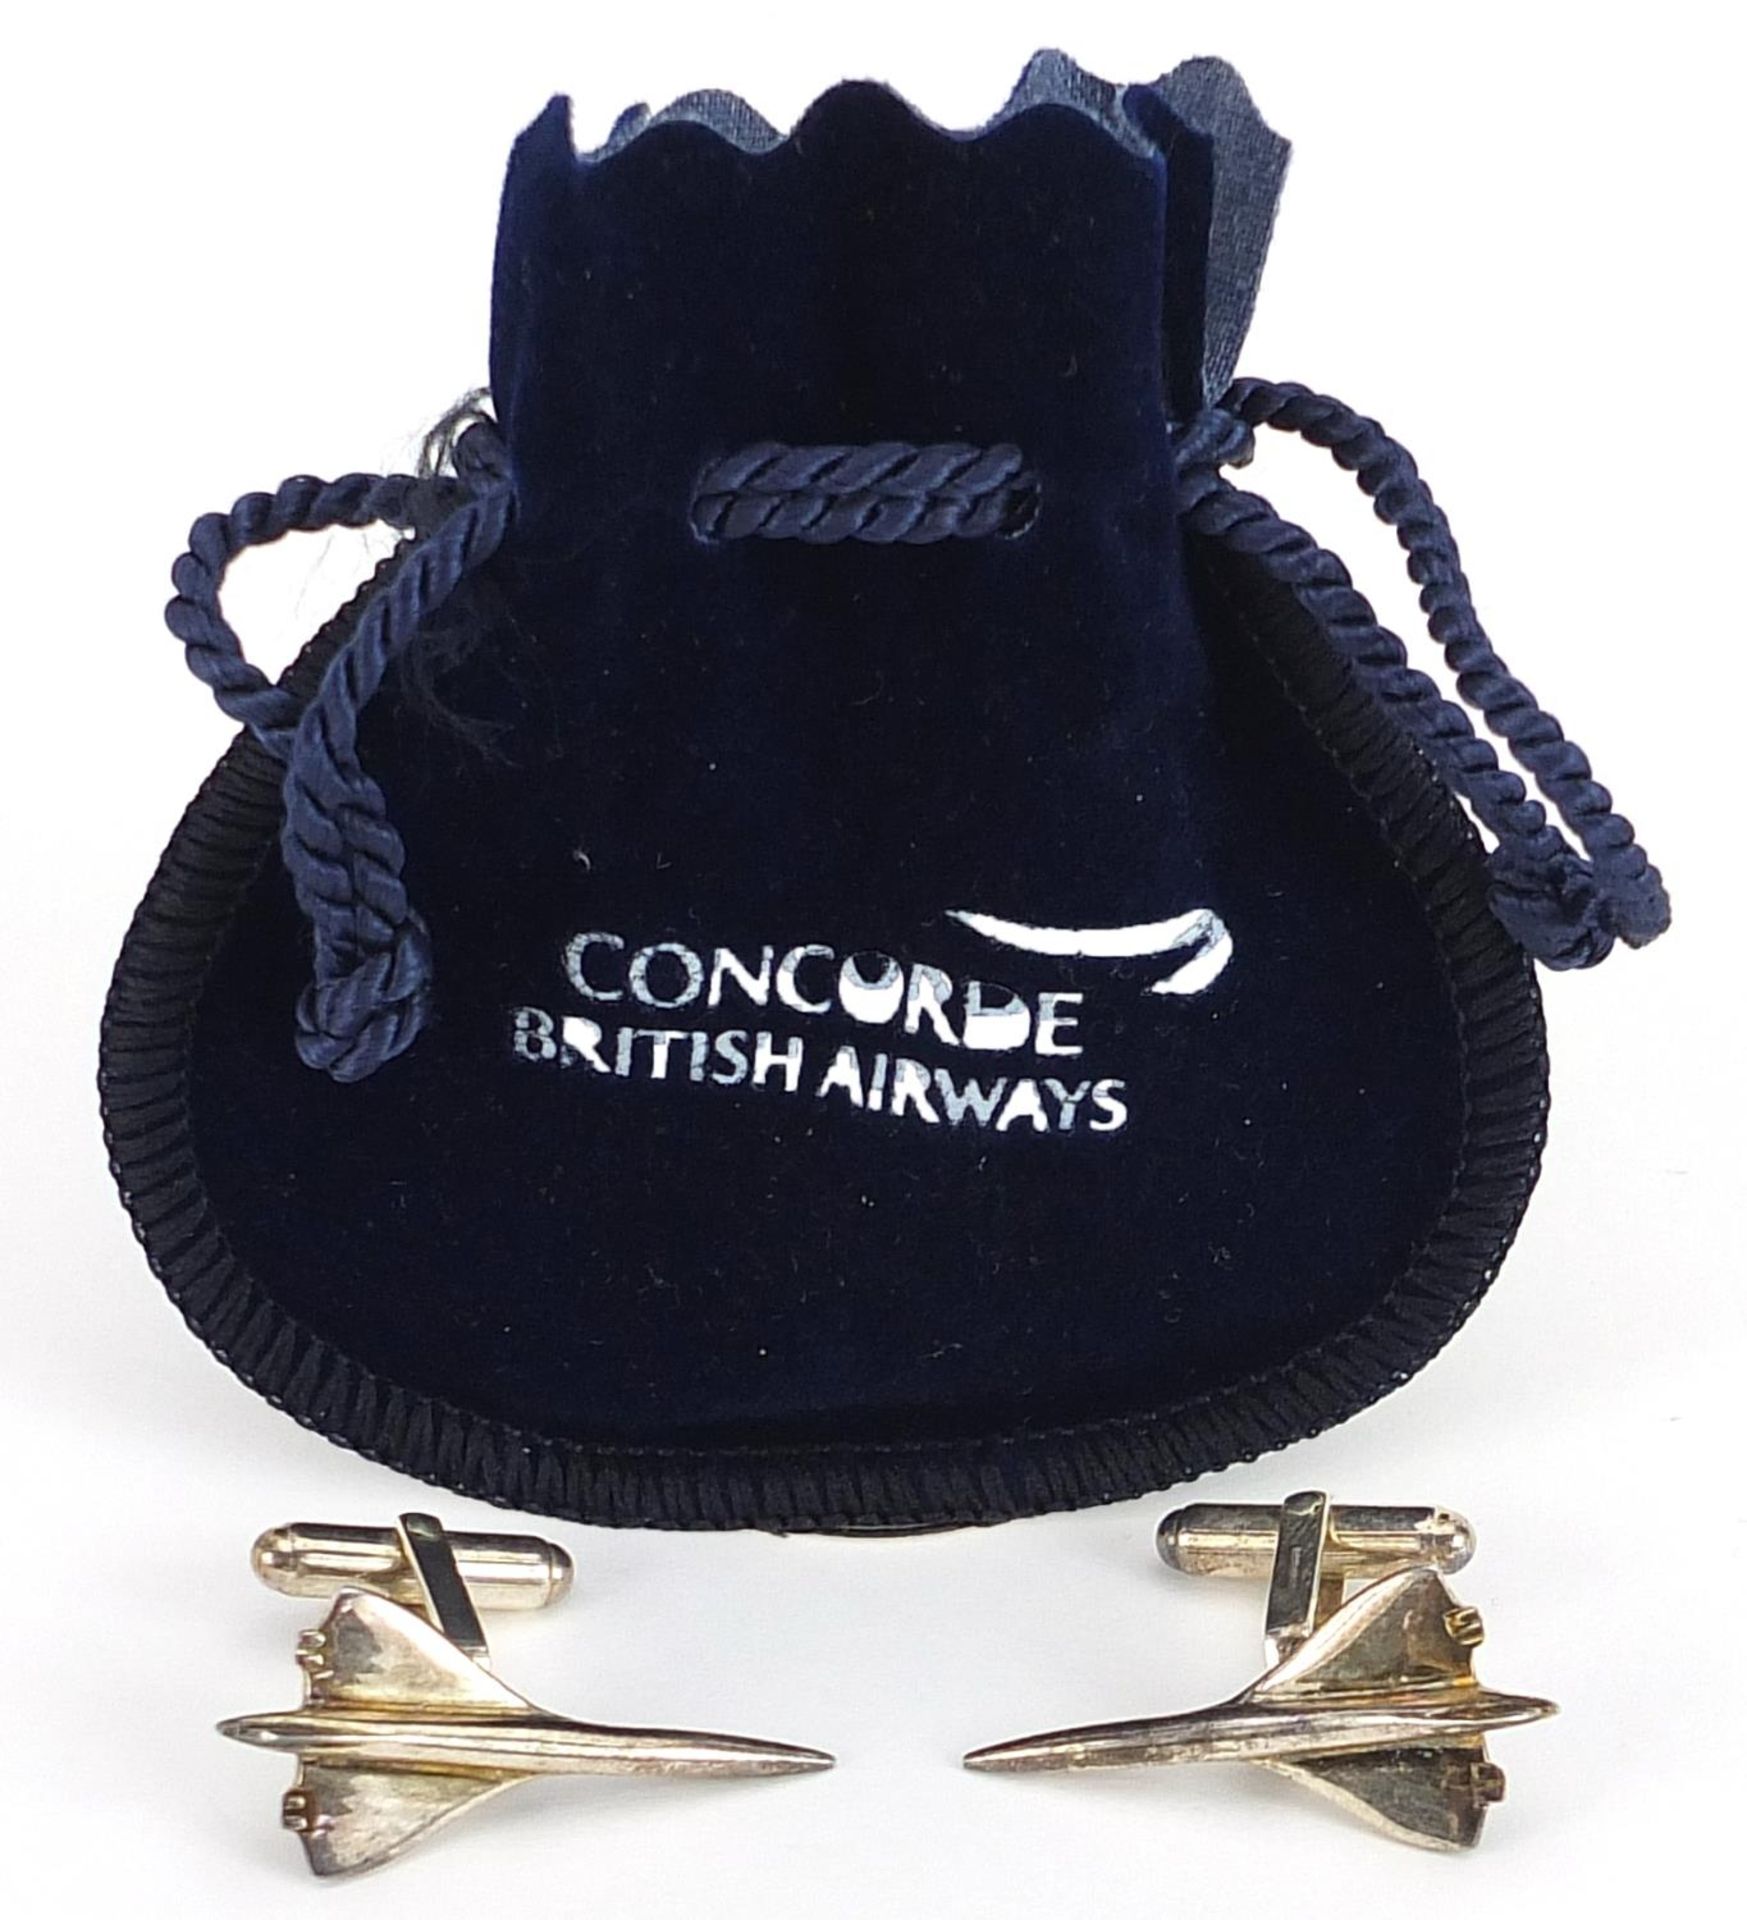 Links of London, pair of silver Concorde cufflinks with cloth pouch, 3.2cm in length, 9.8g